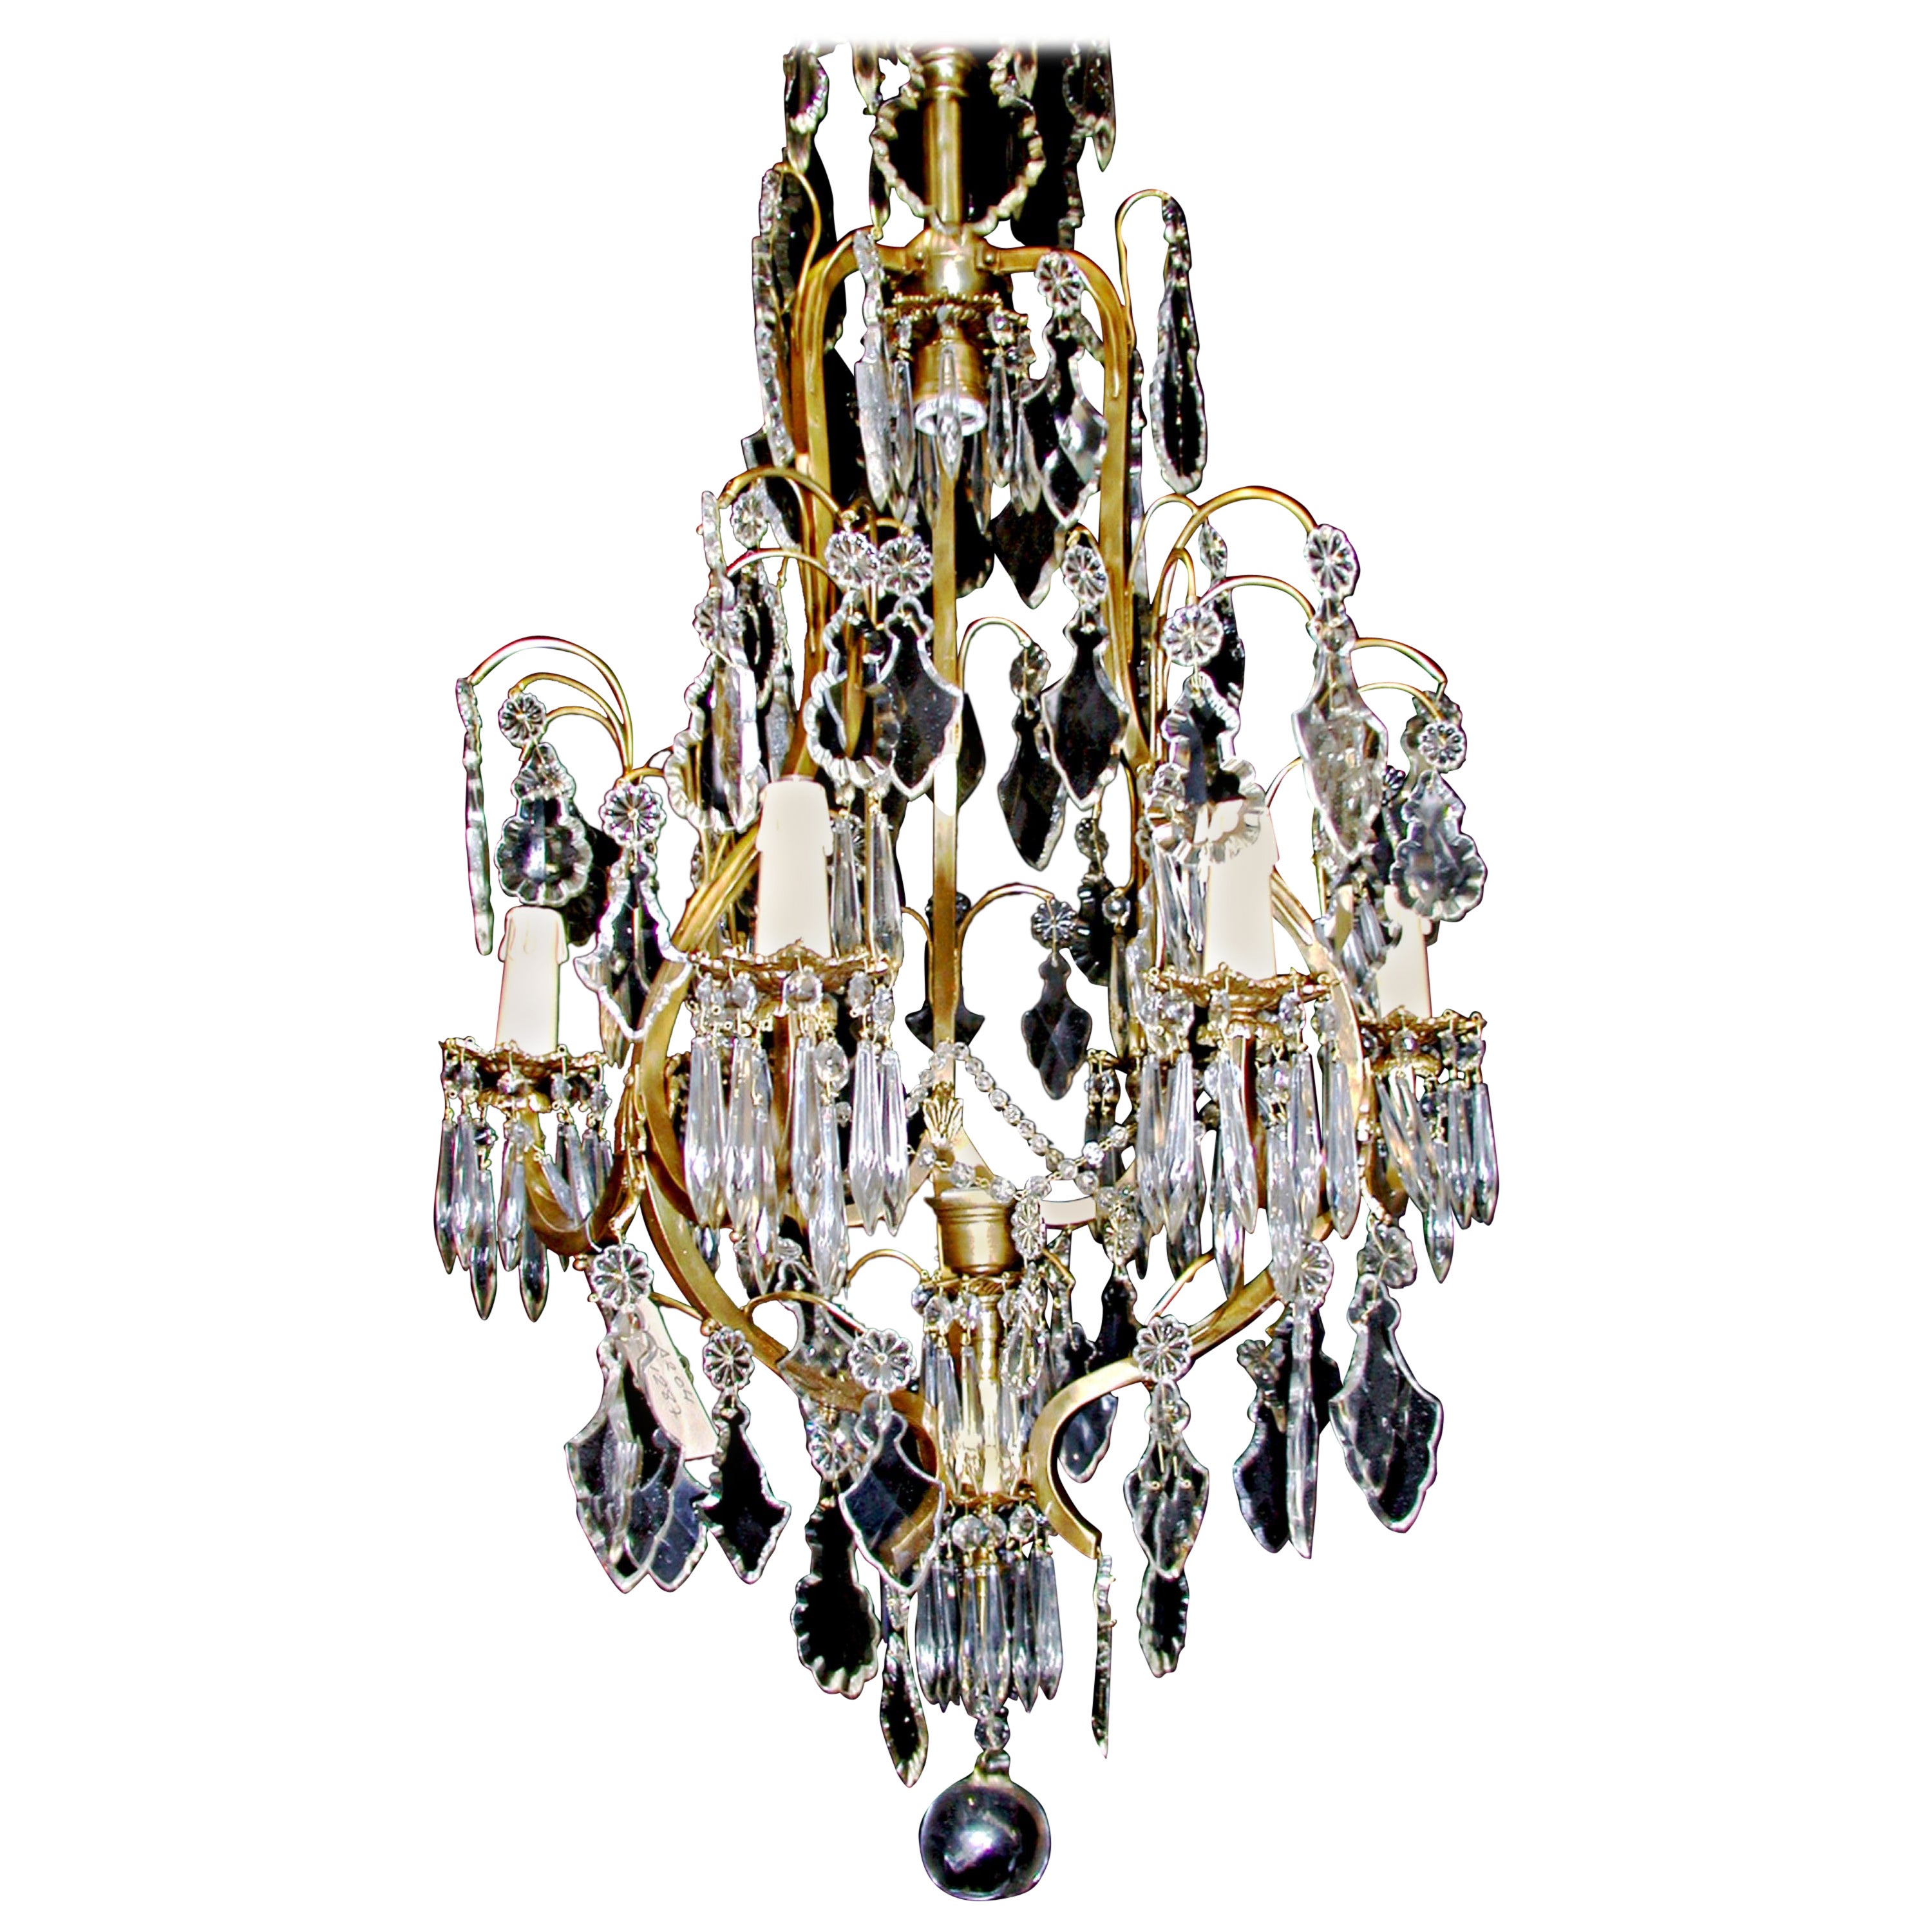 Italian Multi Tiered 6 Arm Crystal Chandelier For Sale